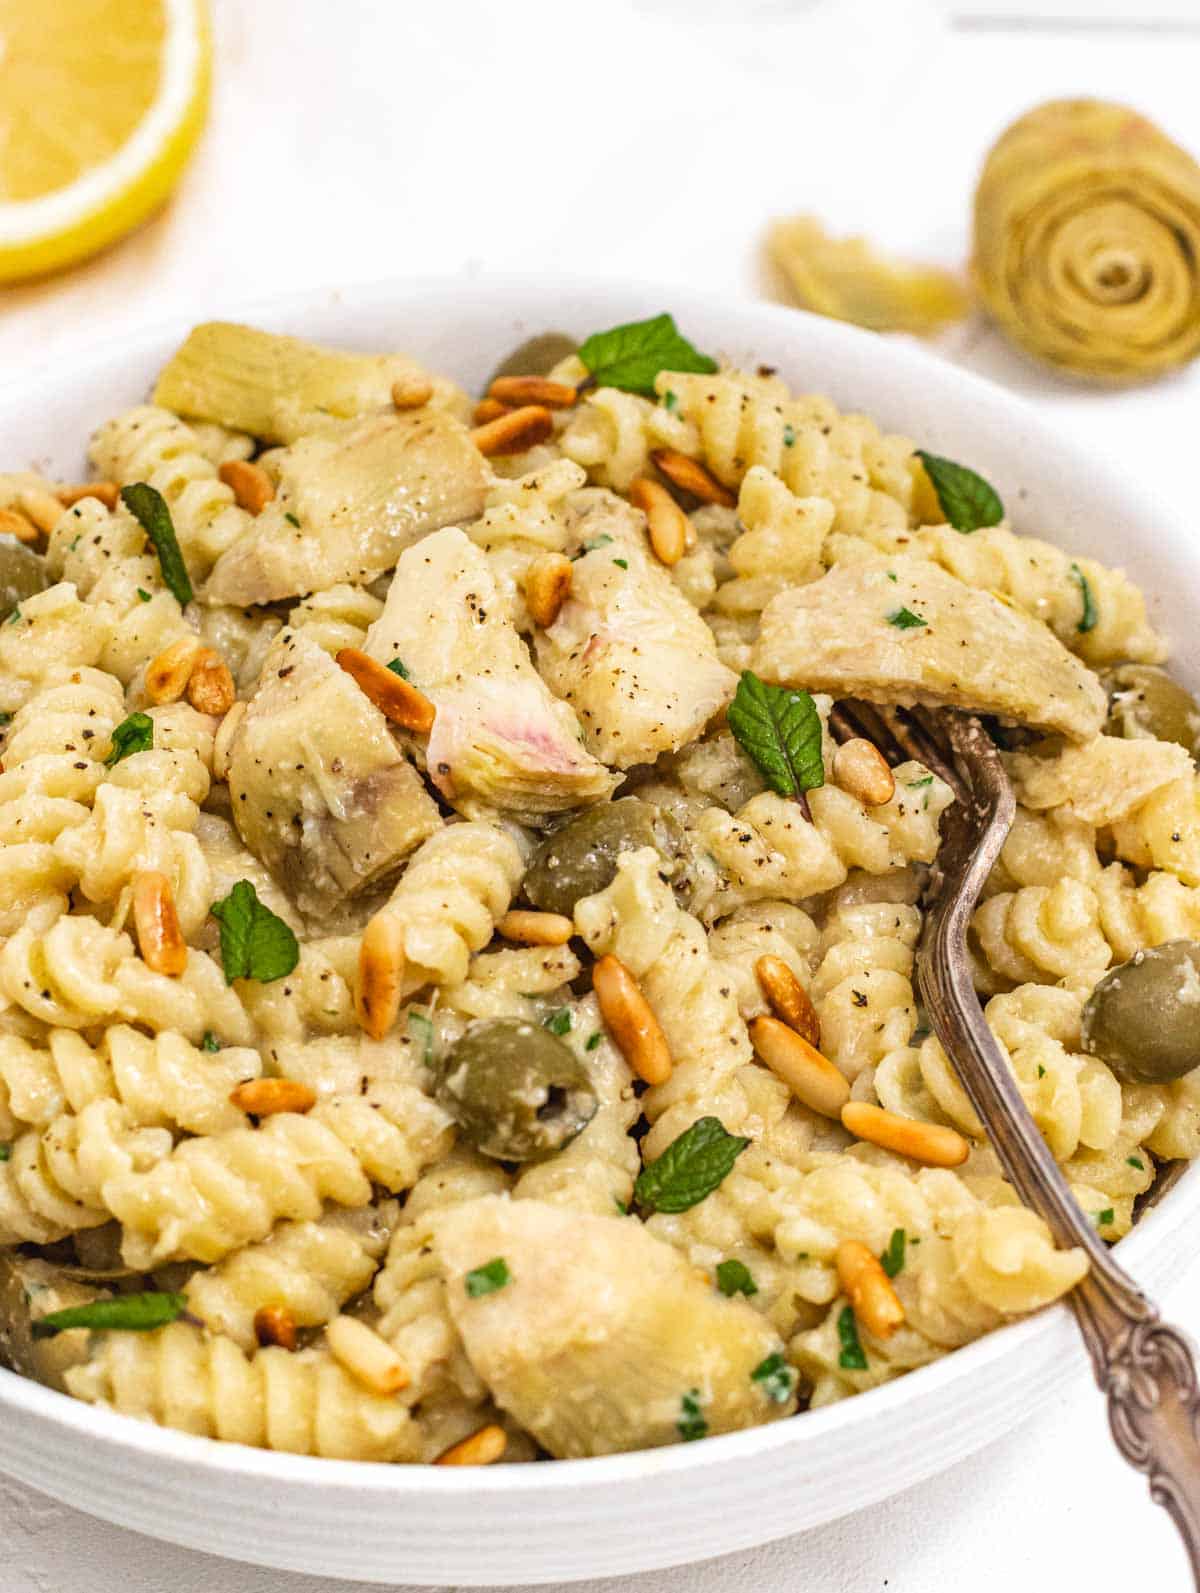 Artichoke pasta with fork and lemon